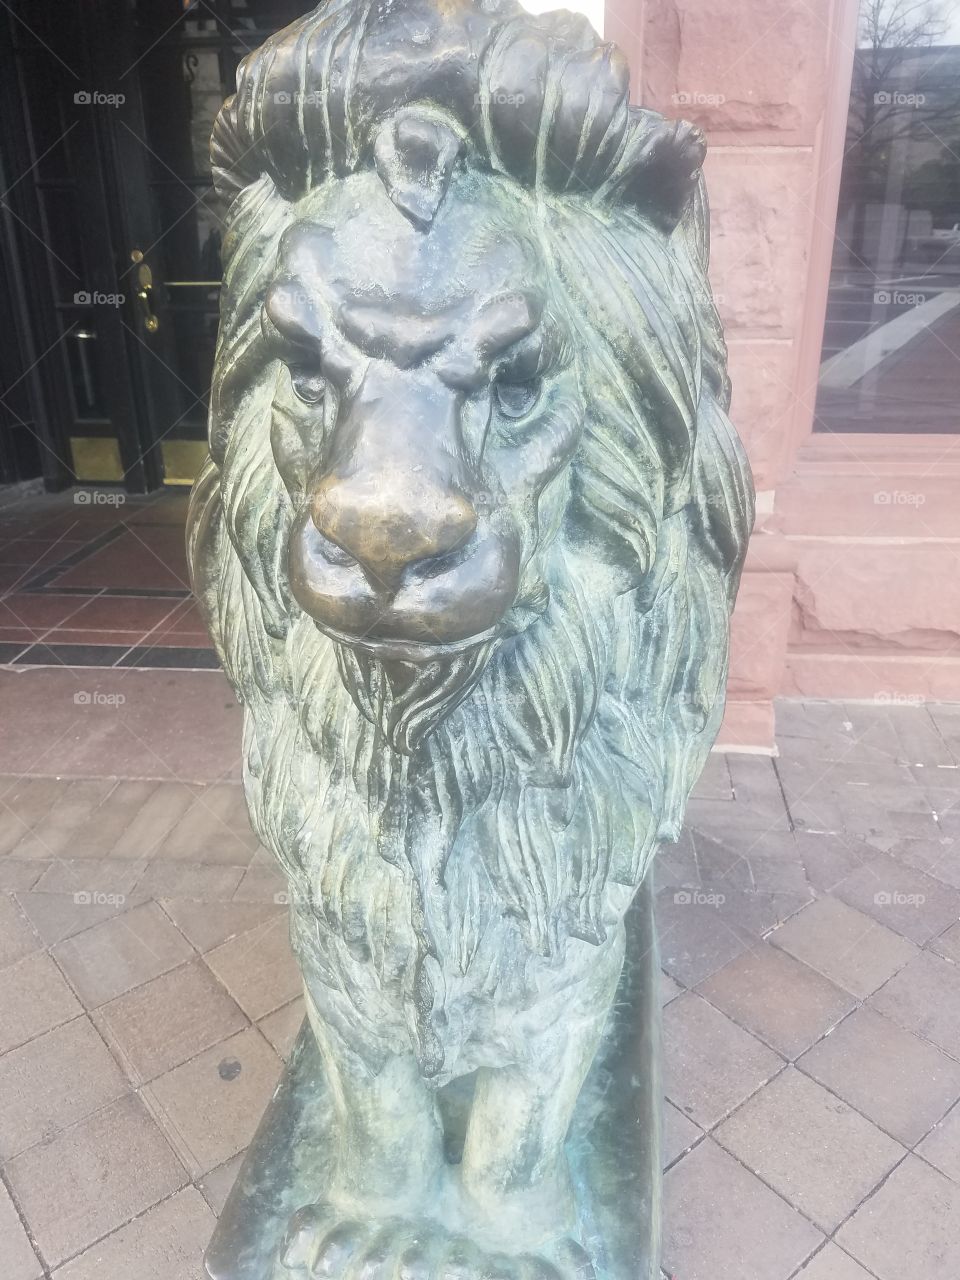 A marble lion statue. It is forever guarding the building it is in front of. Maybe it comes to life?